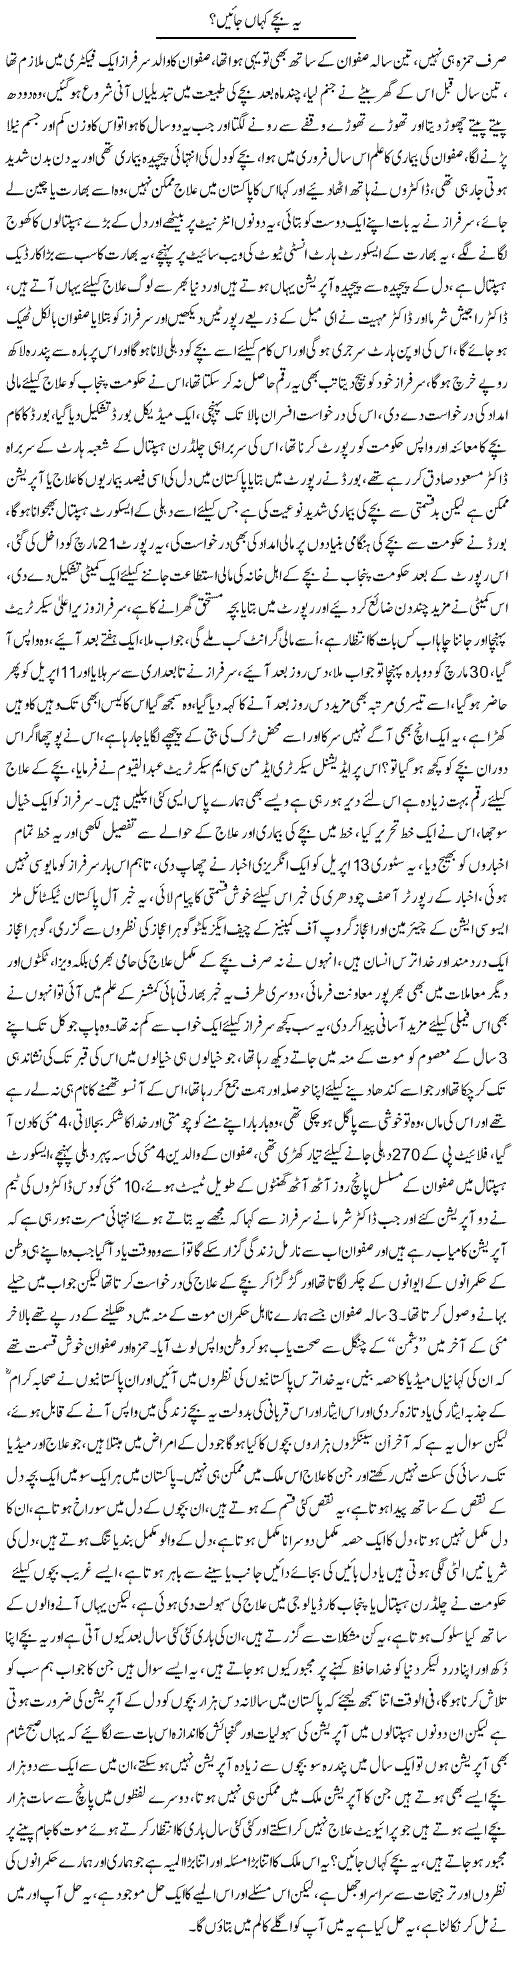 These Kids Express Column Amad Chaudhry 31 July 2011